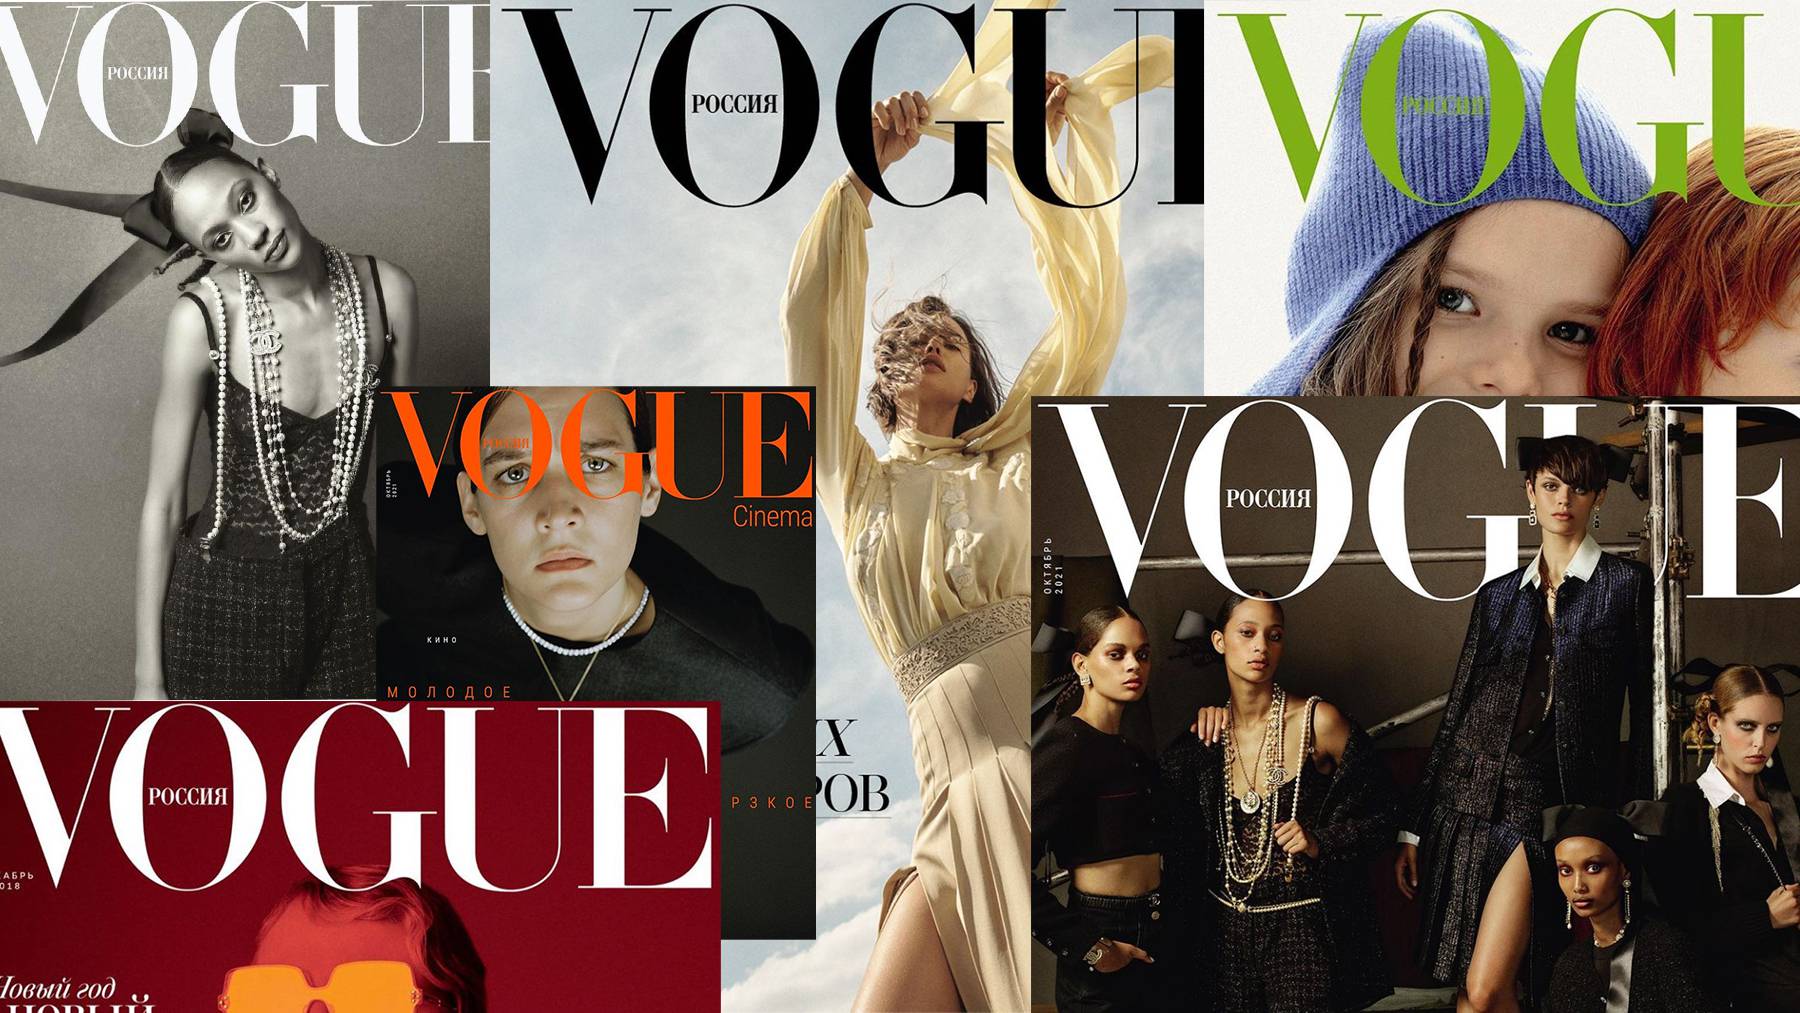 Condé Nast operates several titles in Russia, including Vogue Russia.